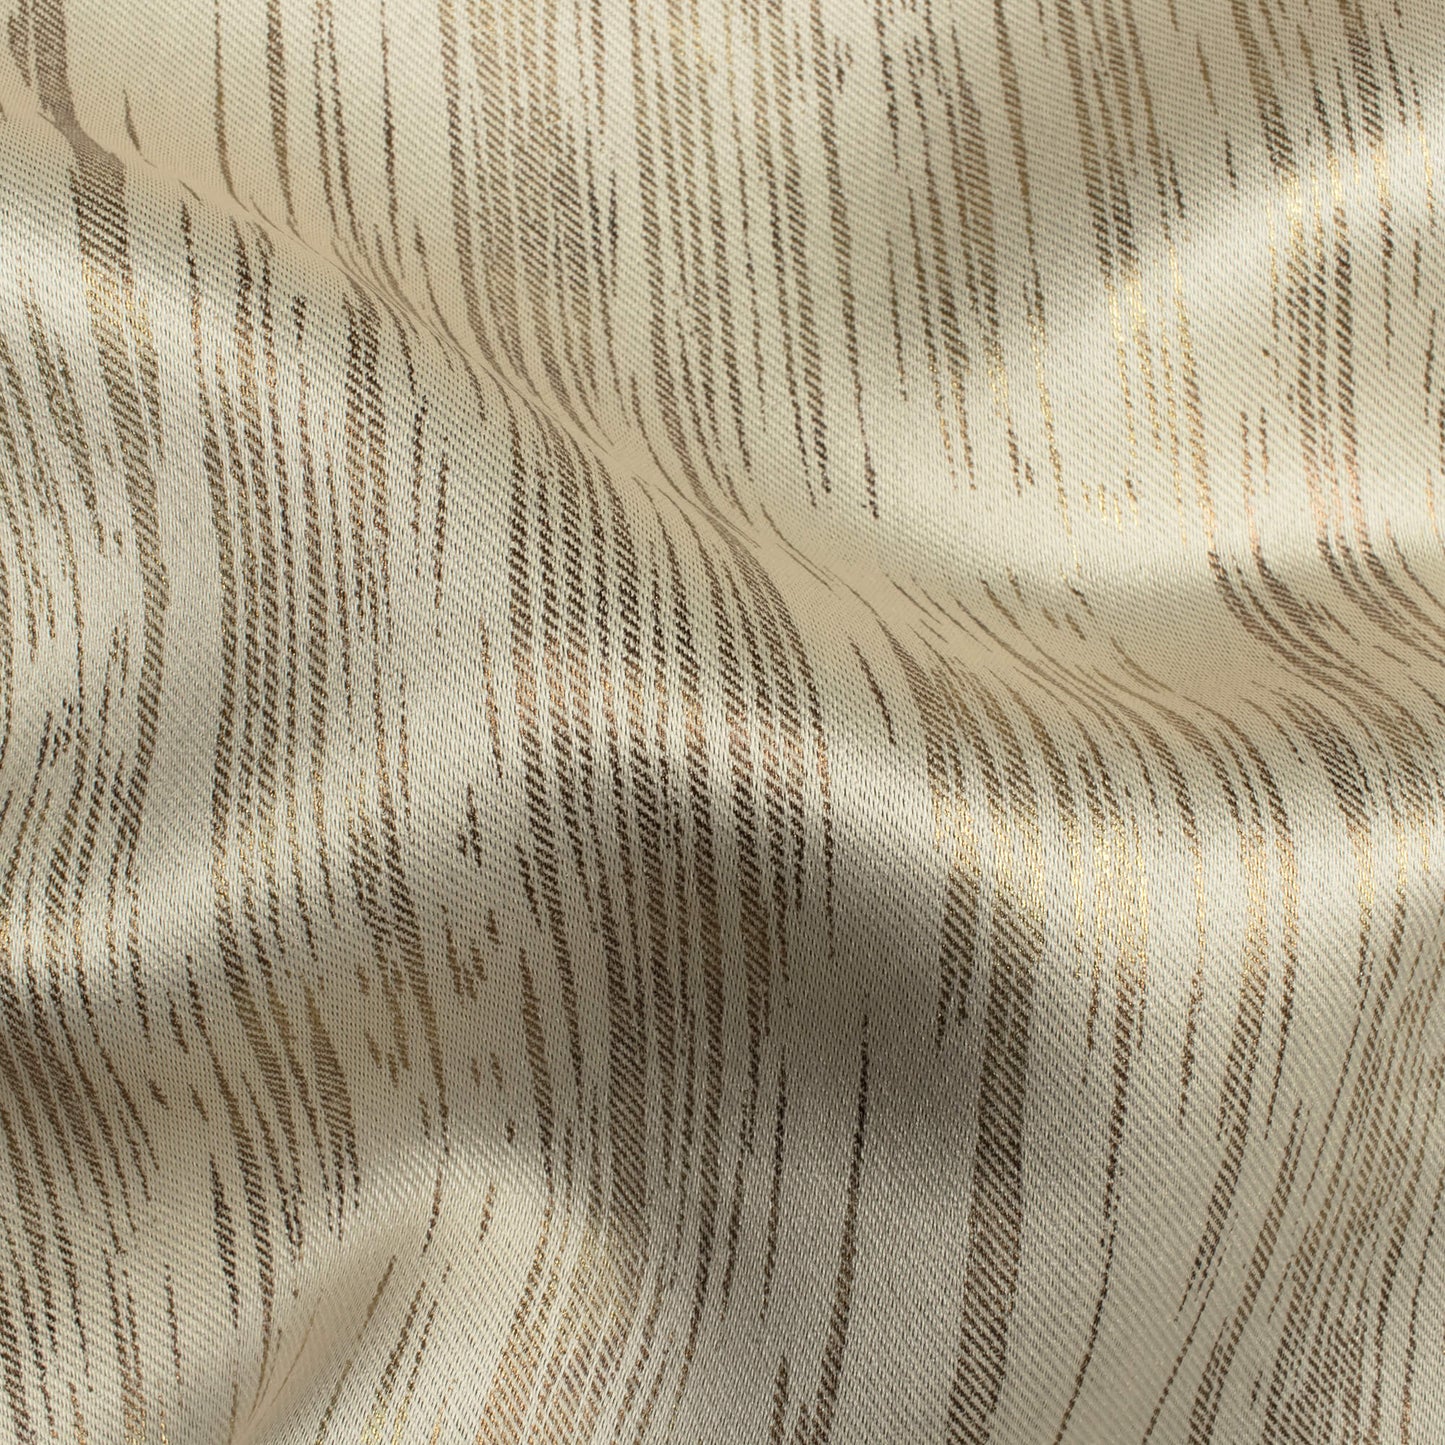 Wheat Brown Textured Golden Foil Premium Curtain Fabric (Width 54 Inches)